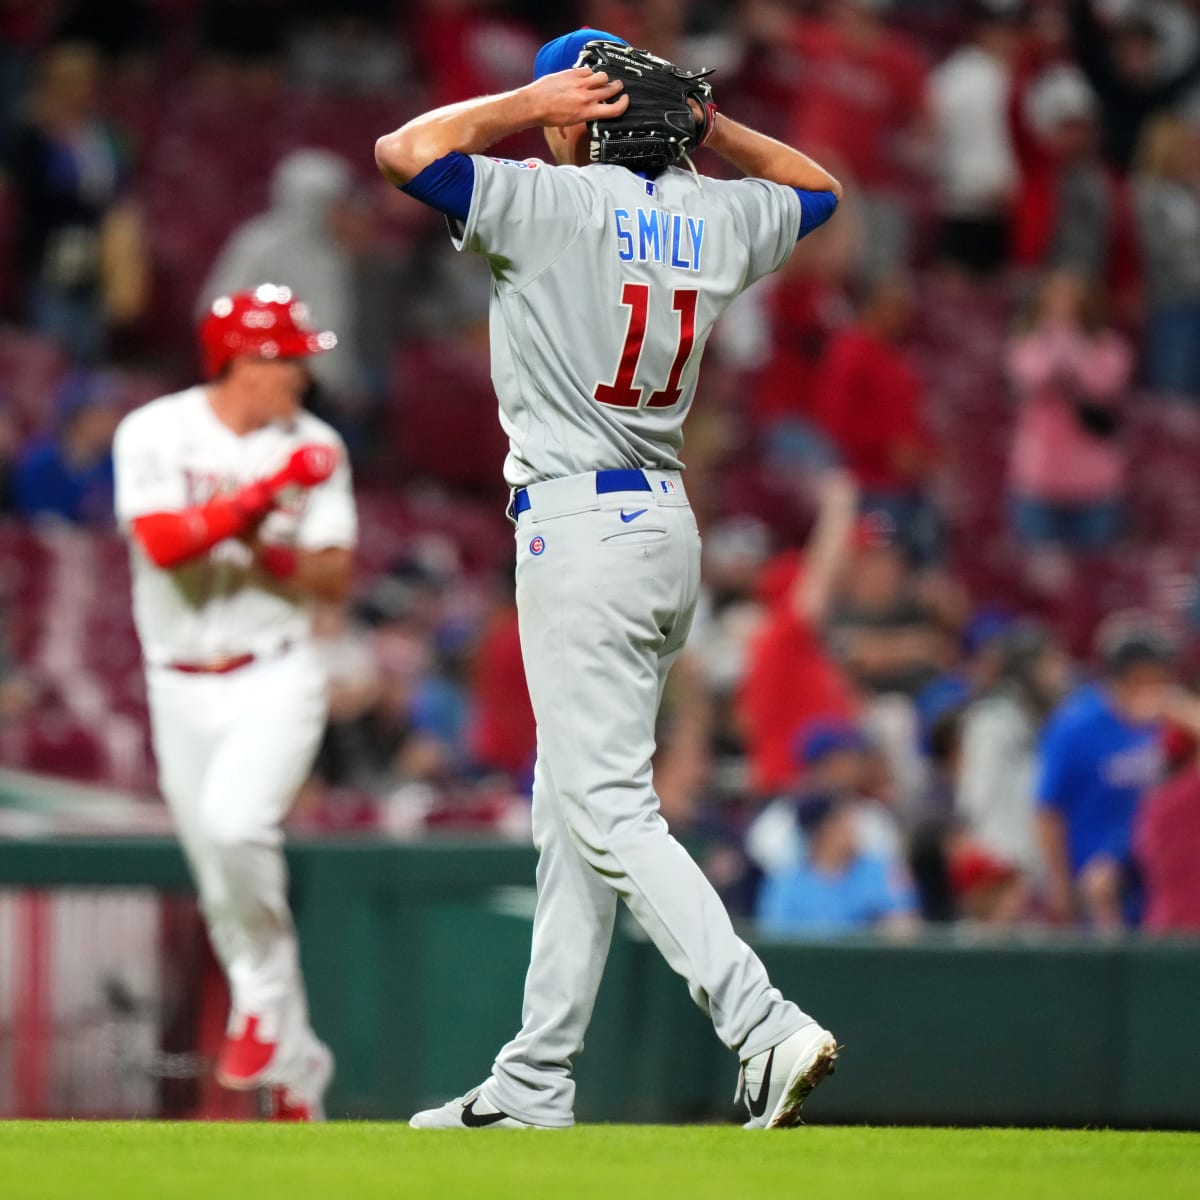 The Cubs a week in: David Ross' decisions, Patrick Wisdom's great